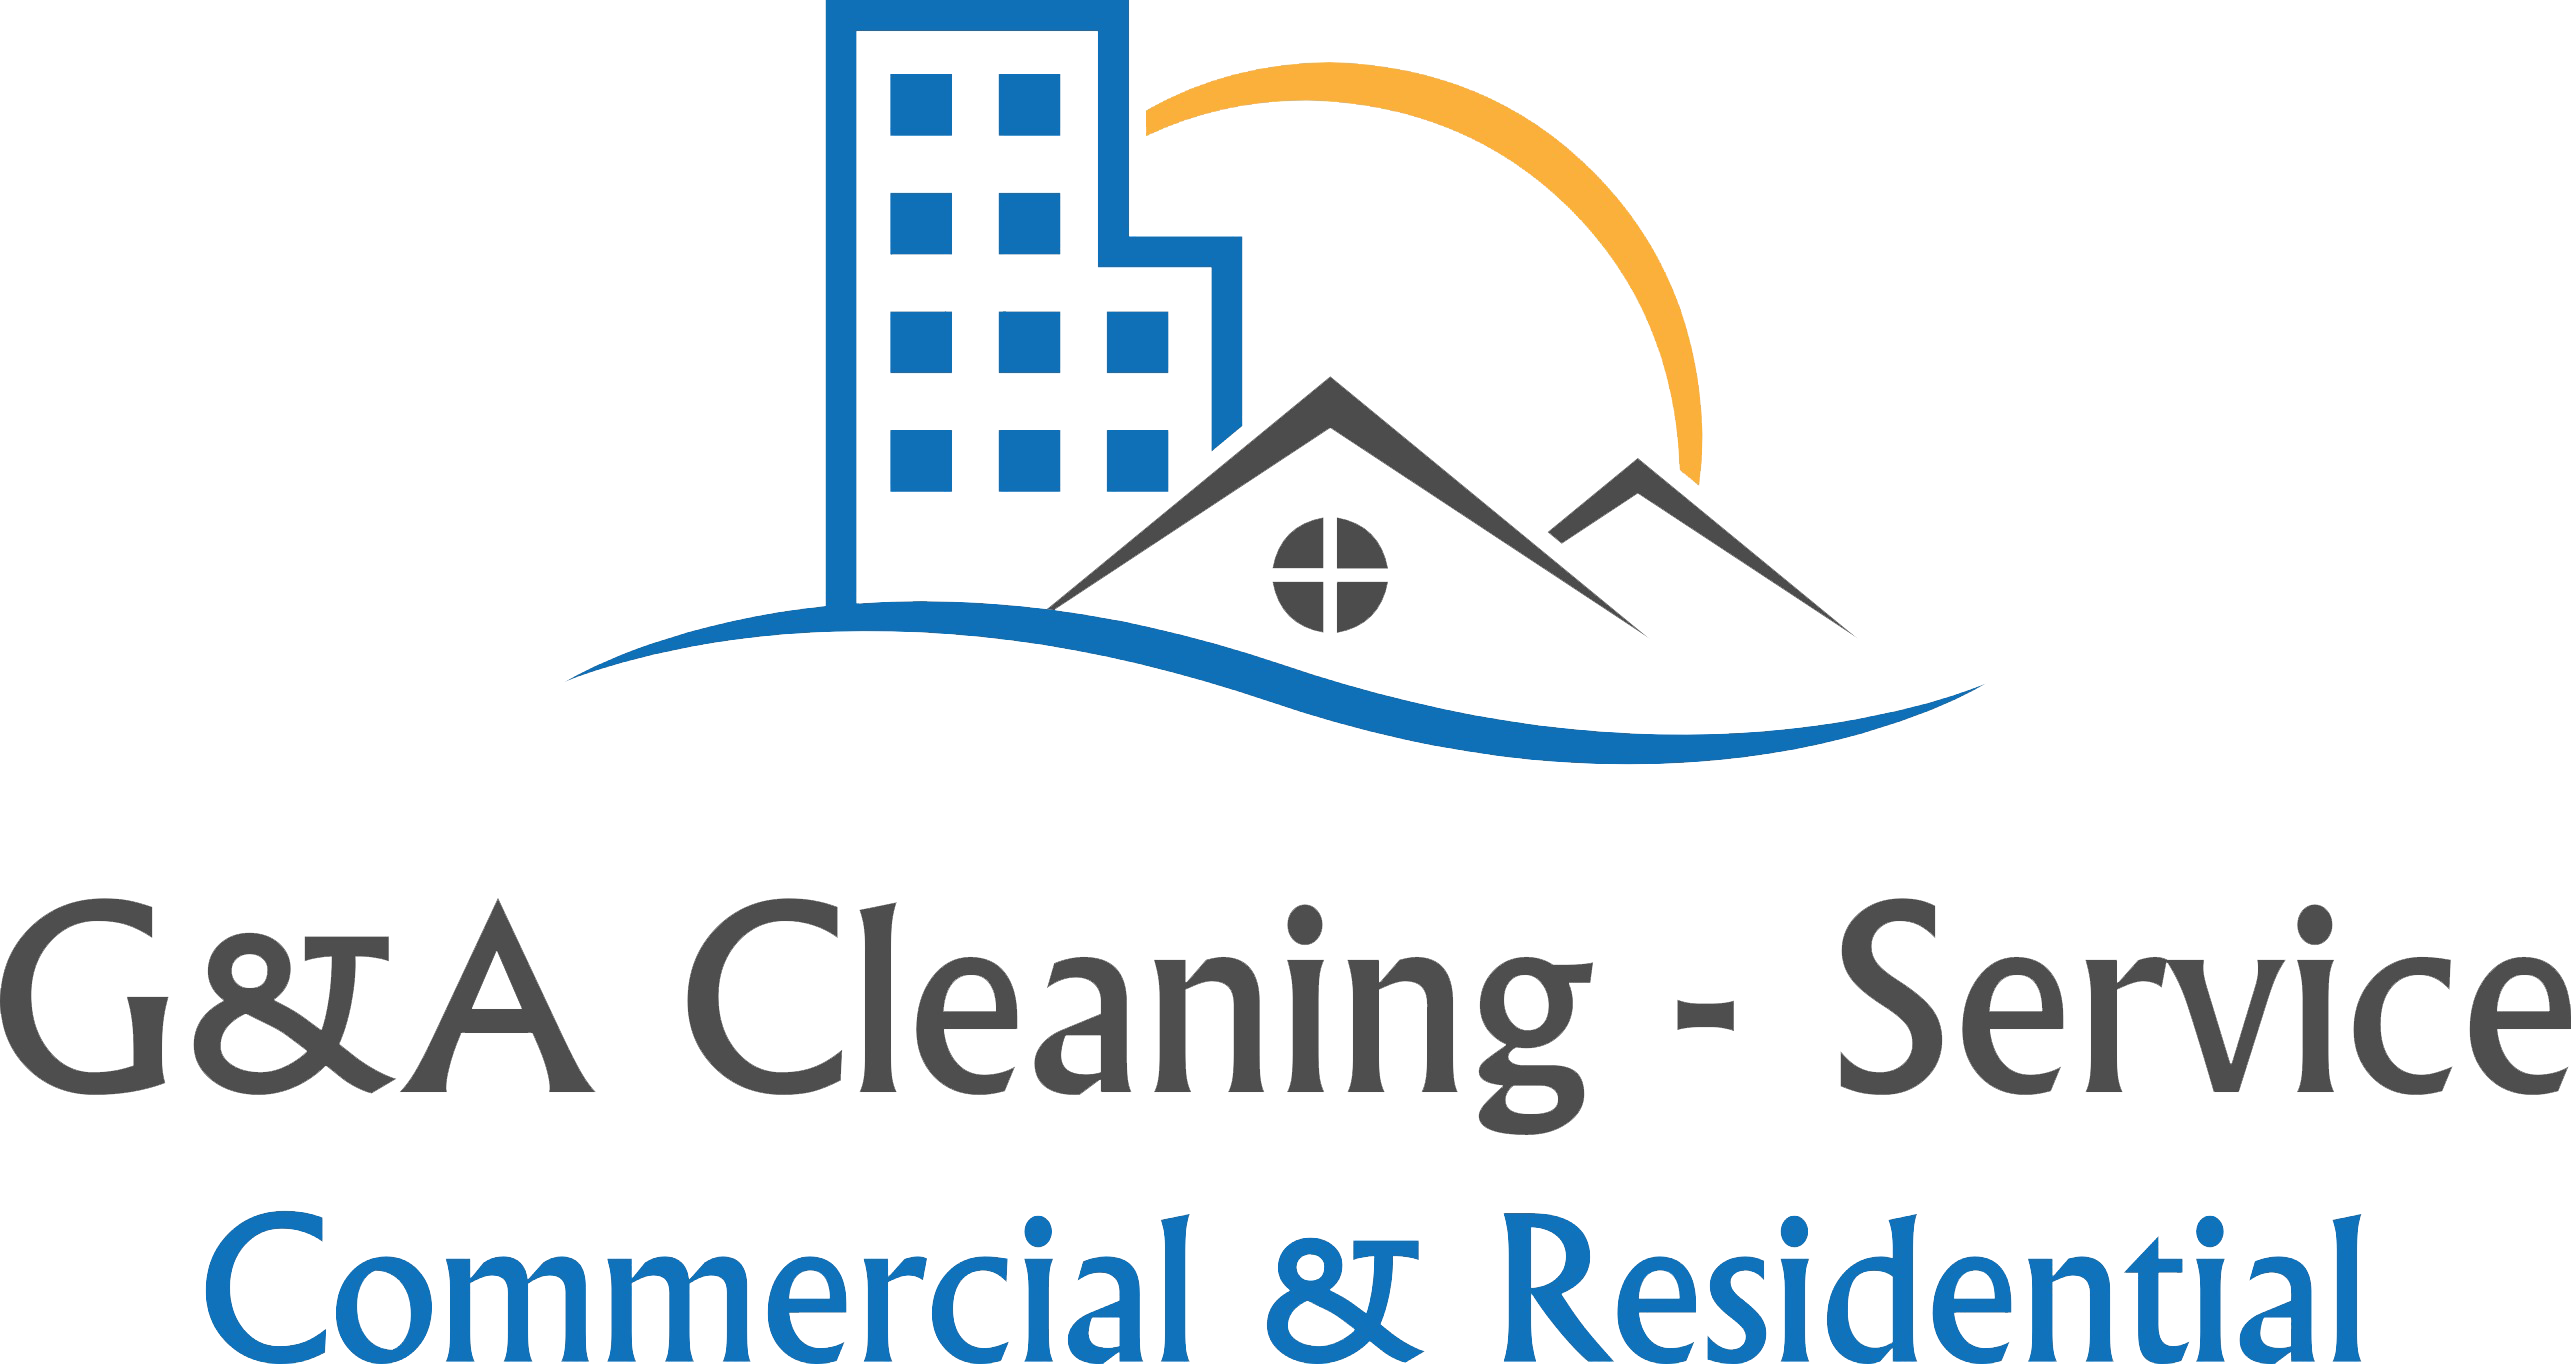 residential and commercial cleaning services near collinsville illinois